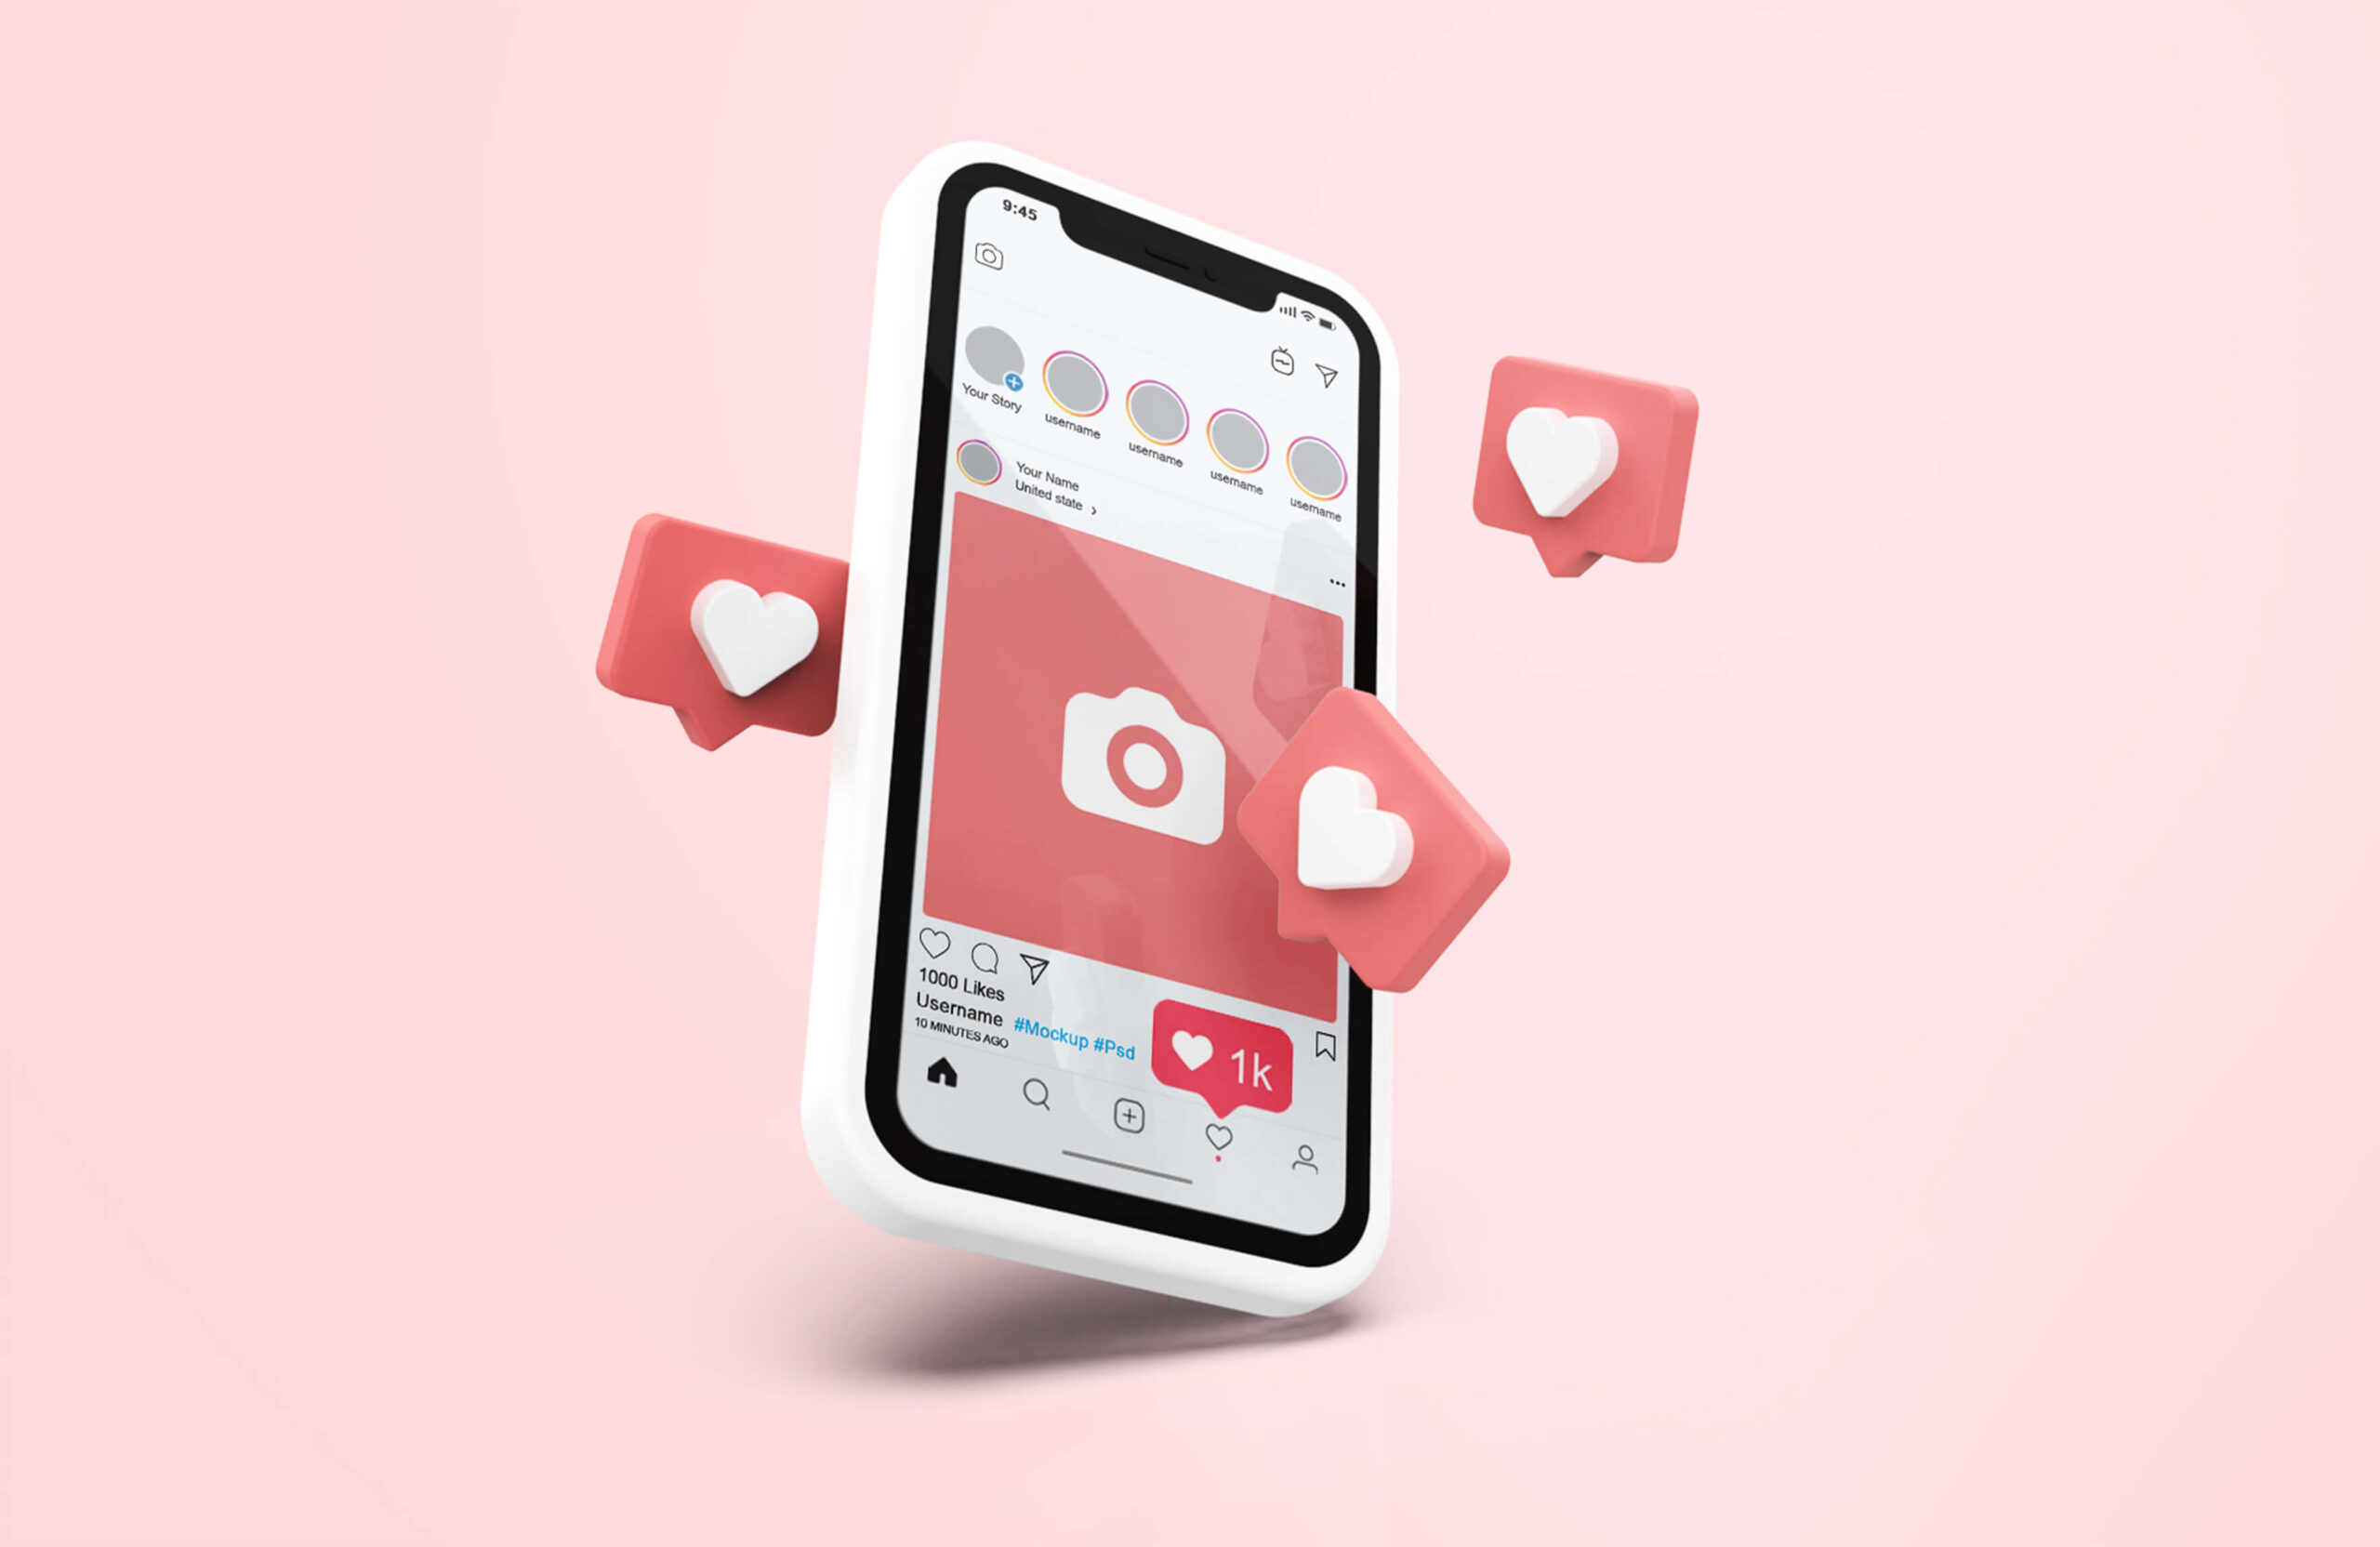 Top 10 insta stories templates from Canva – Valentines Day edition